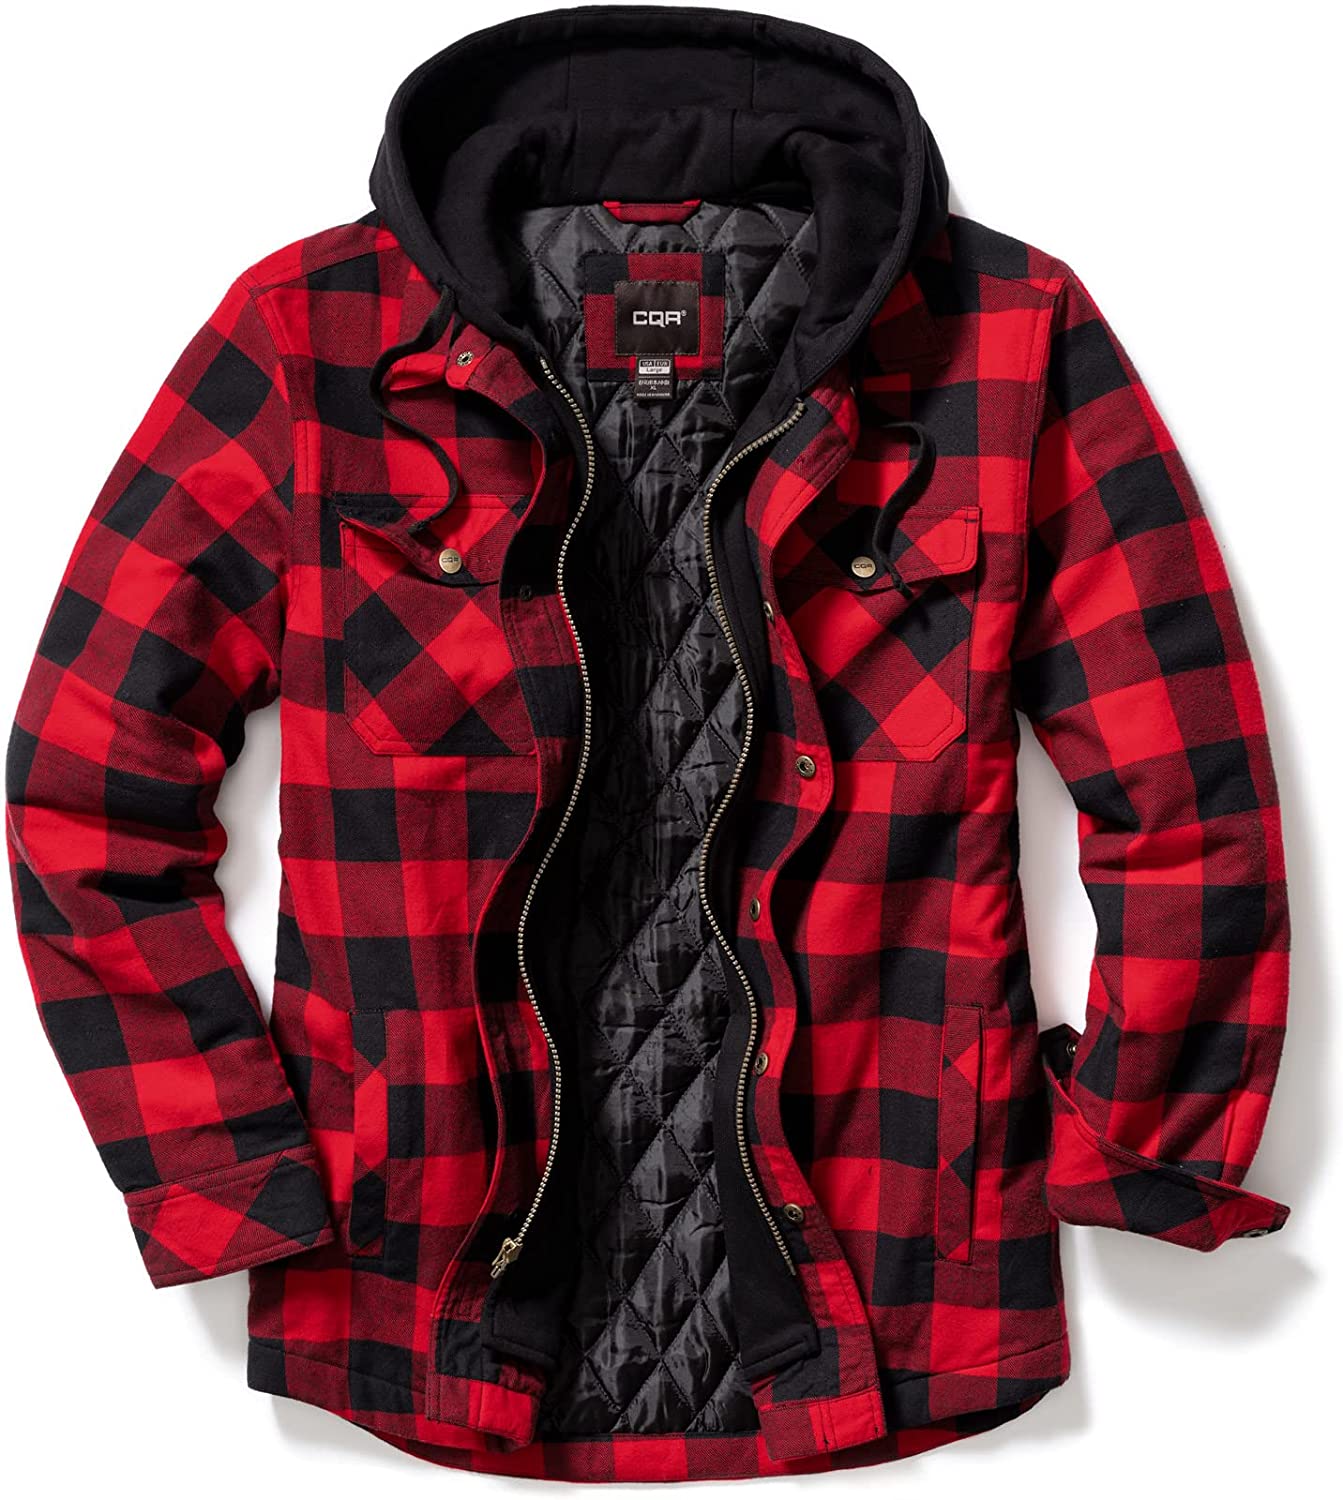 Long Sleeve Plaid Button Up Jackets CQR Men’s Hooded Quilted Lined Flannel Shirt Jacket 